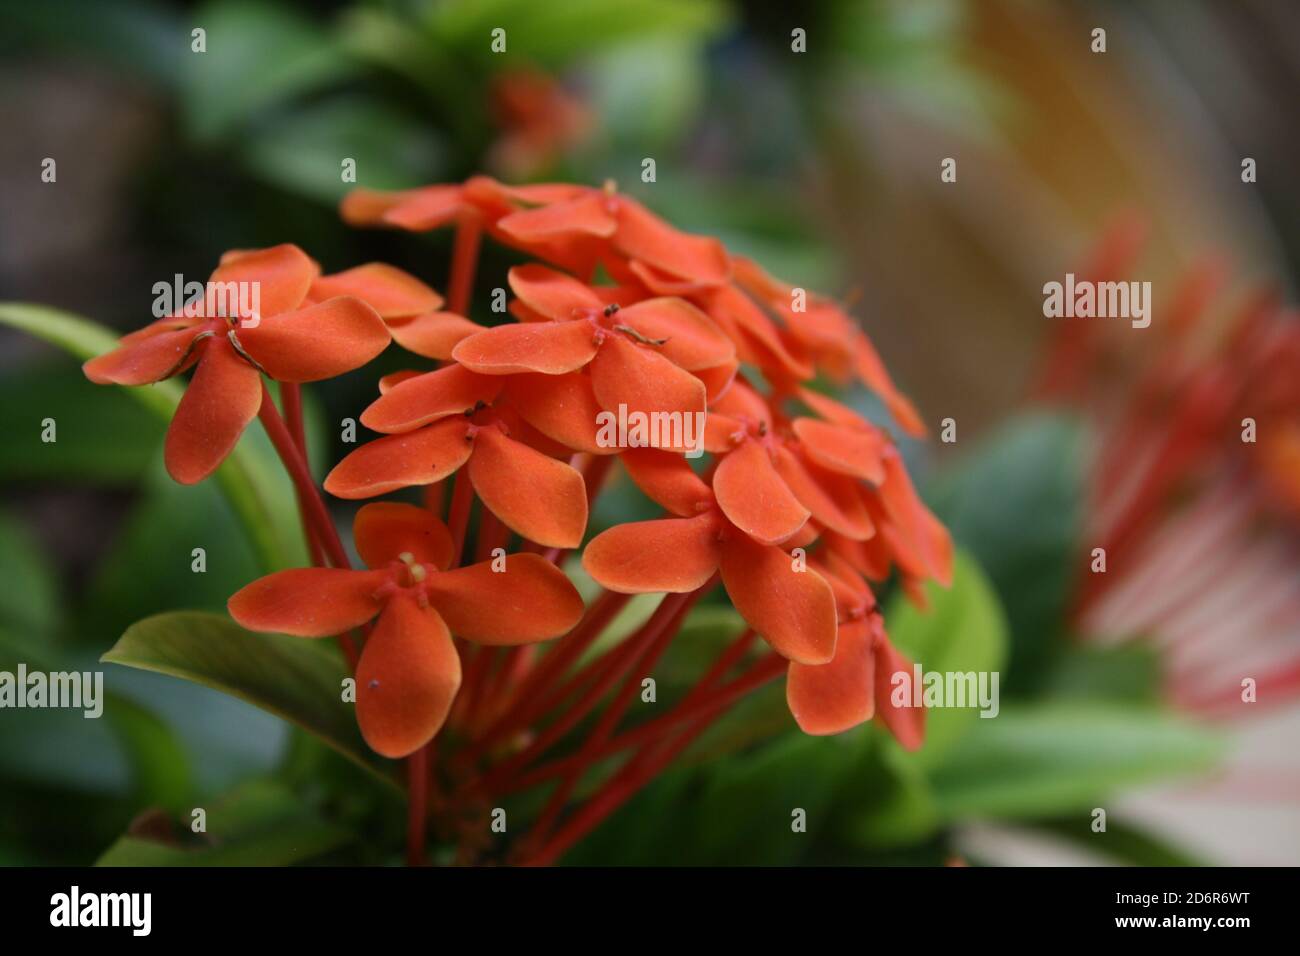 small orange flower, with 4 symetrical petals on a red stalk and irregularly shaped in a cluster on a small green plant with the background blurred ou Stock Photo